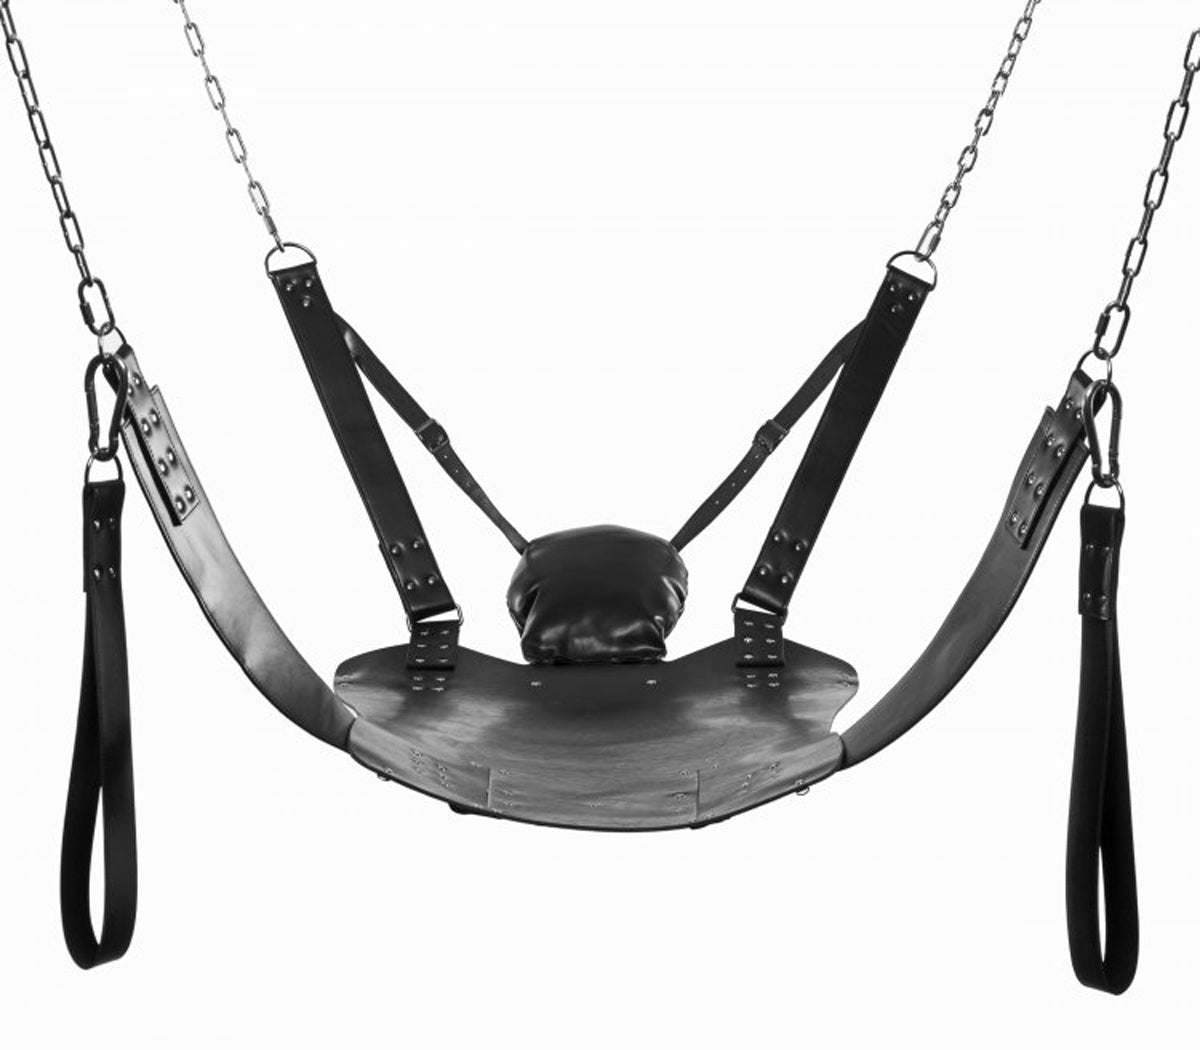 Extreme Sling And Swing Seksschommel